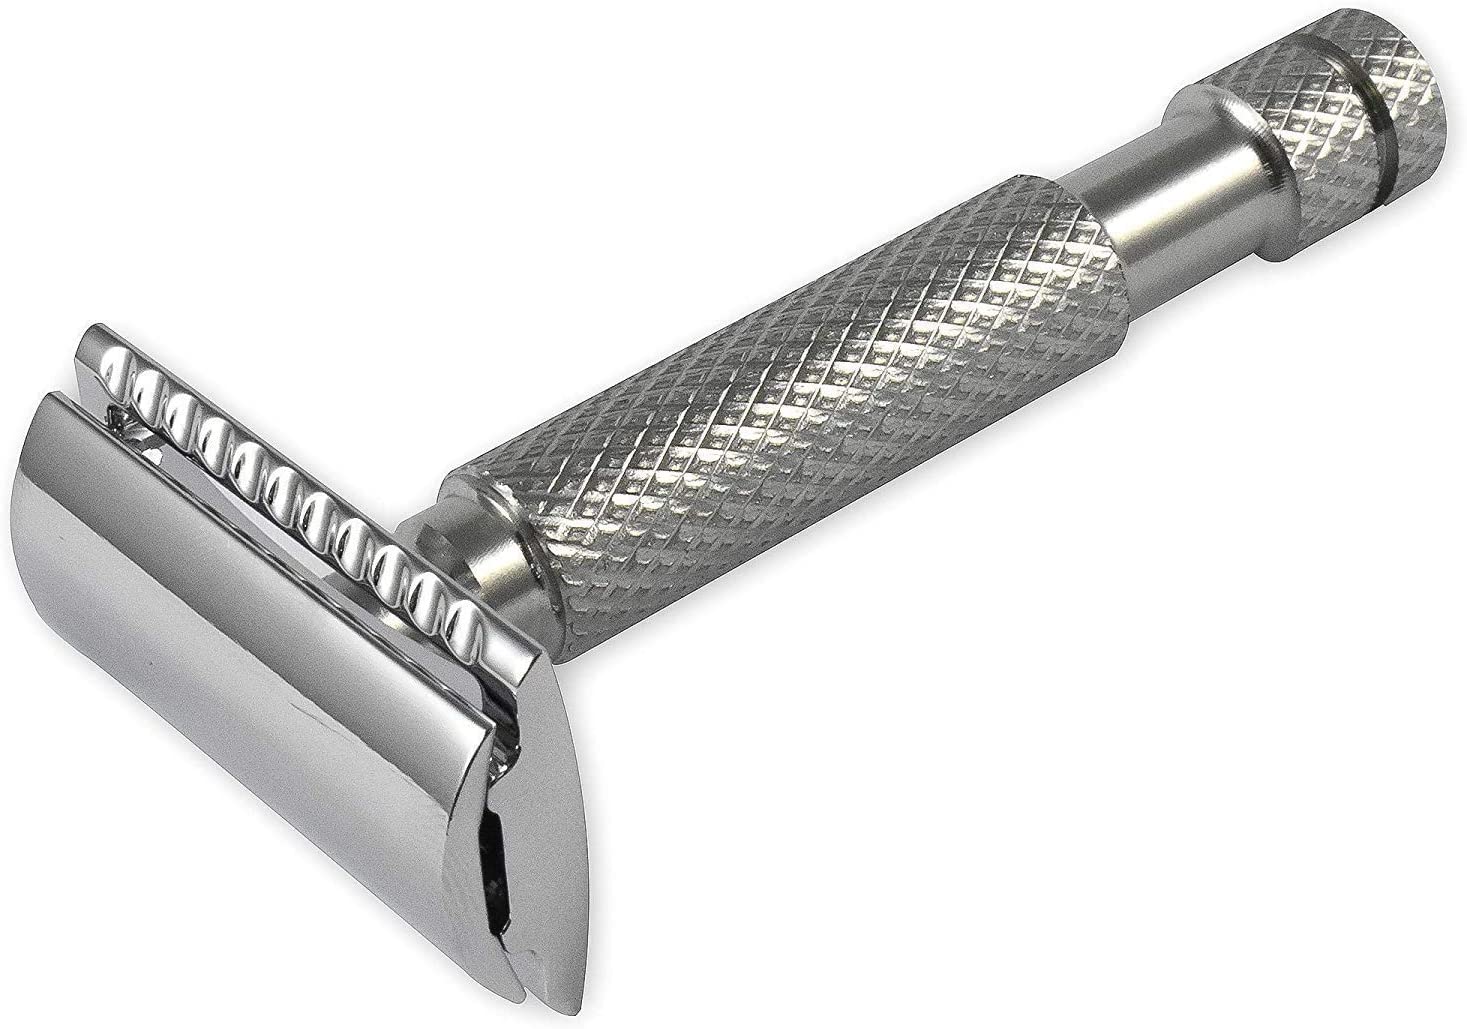  Braveheart Stainless Steel Handle Razor with Chrome Plated Head